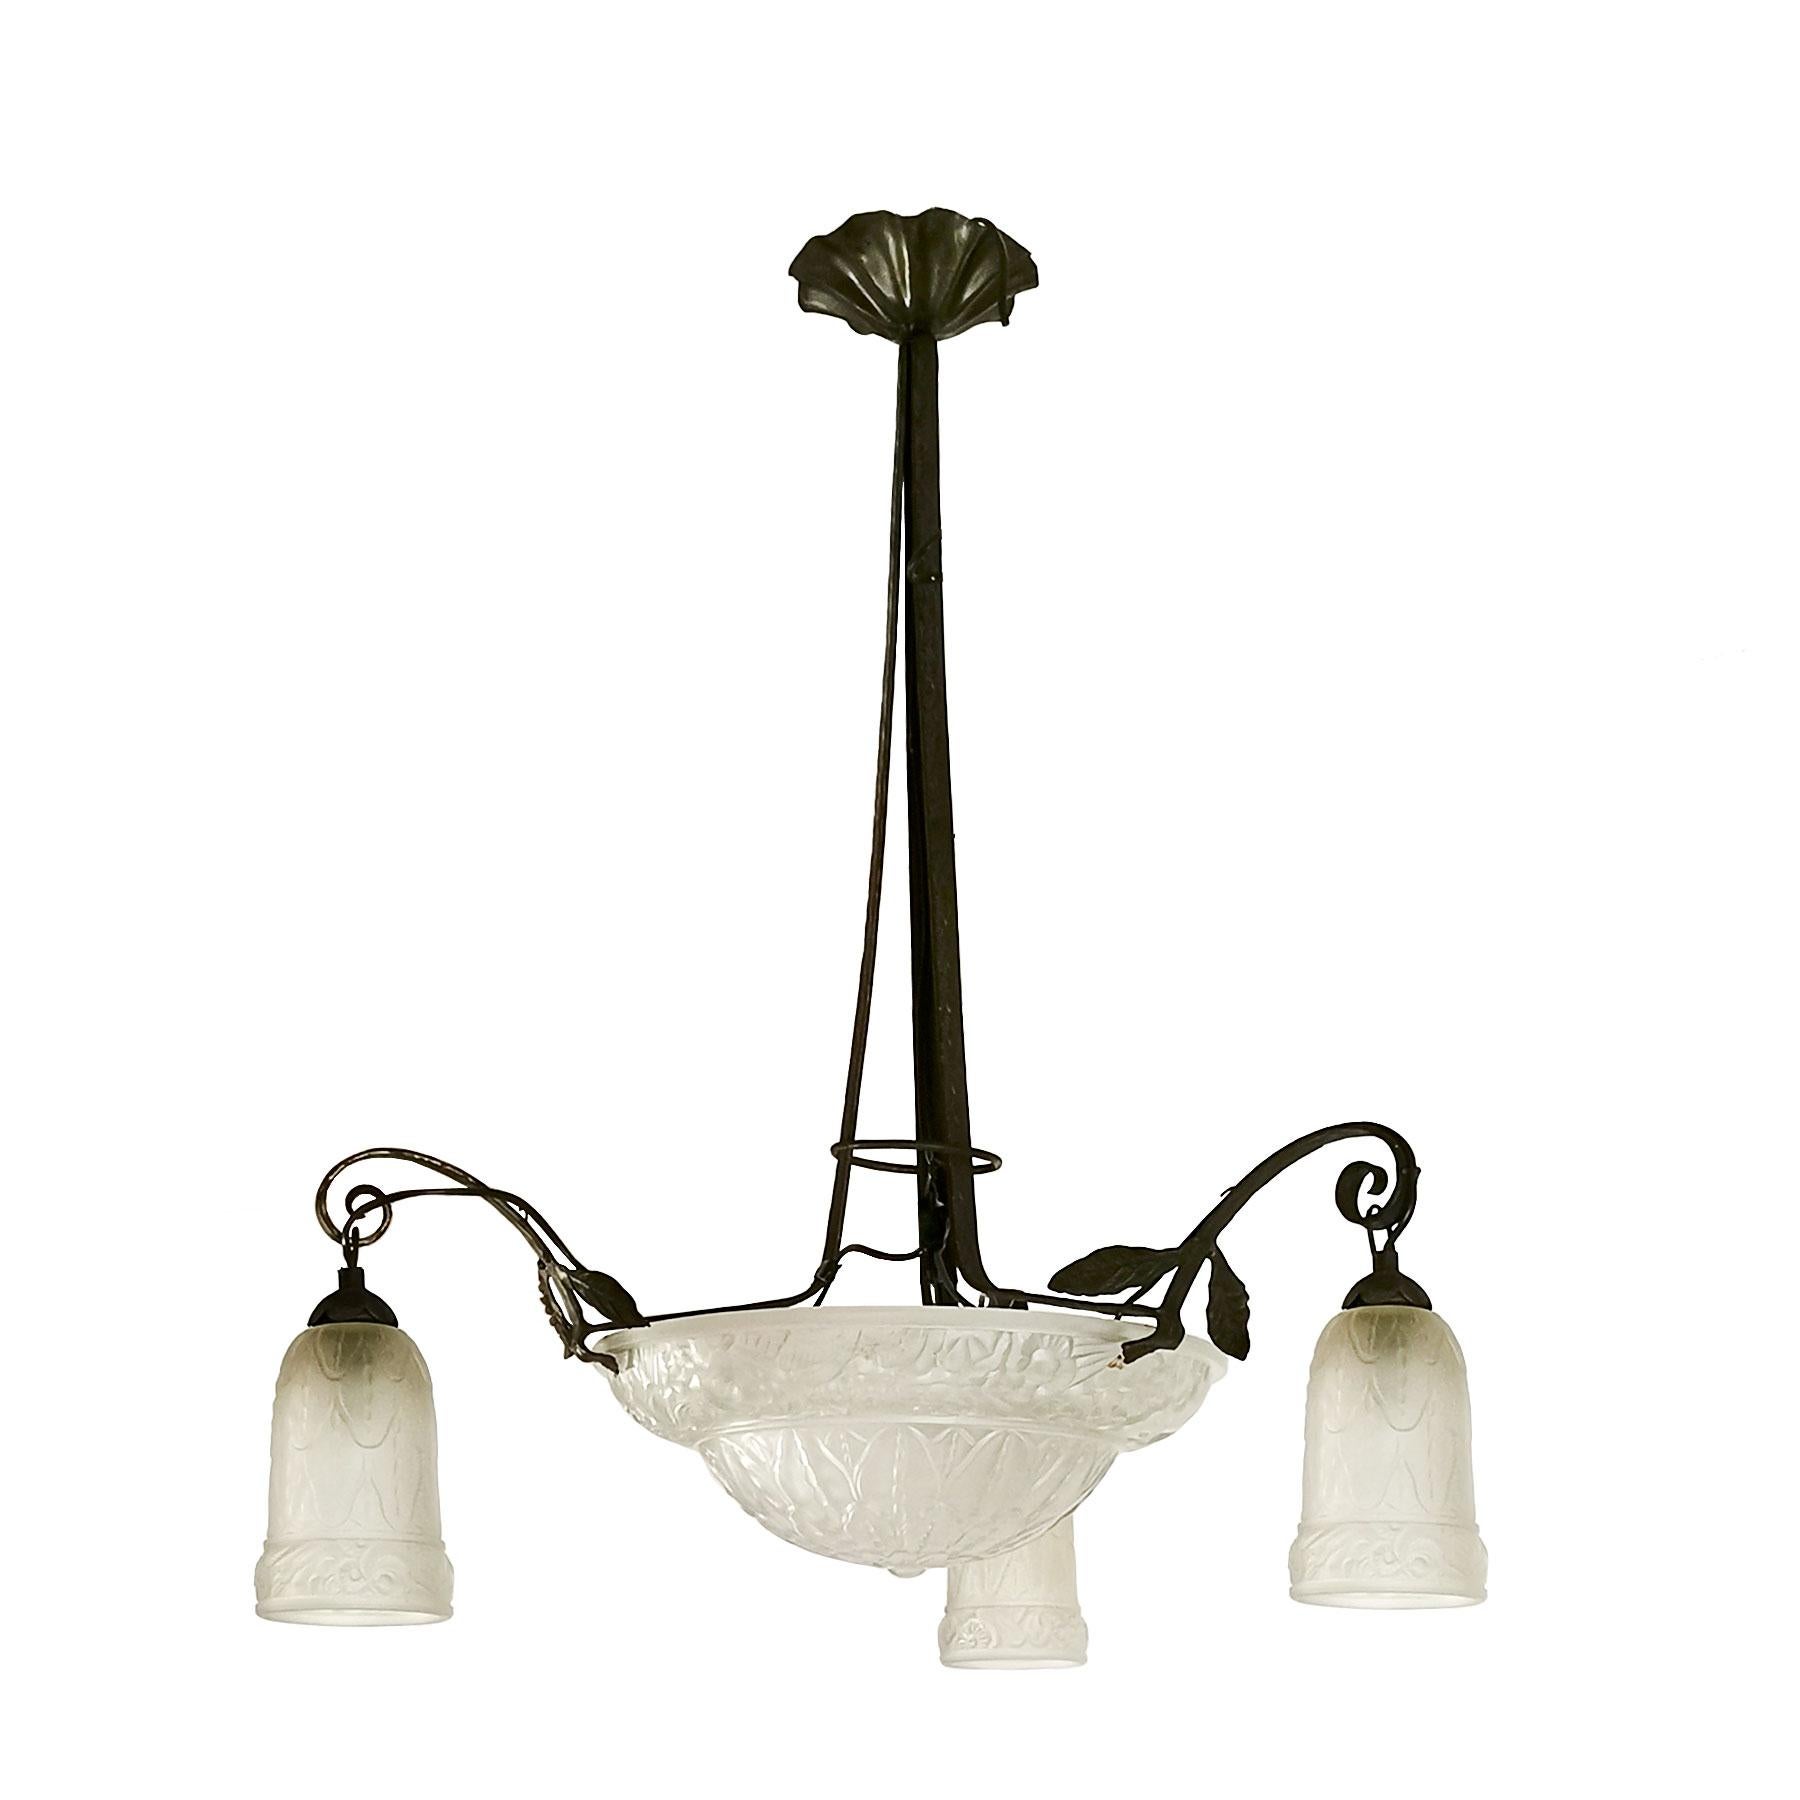 Art Deco chandelier in blackened wrought iron, pressed glass bowl and three tulips. New electrical system (bayonette bulbs).

France, 1925.